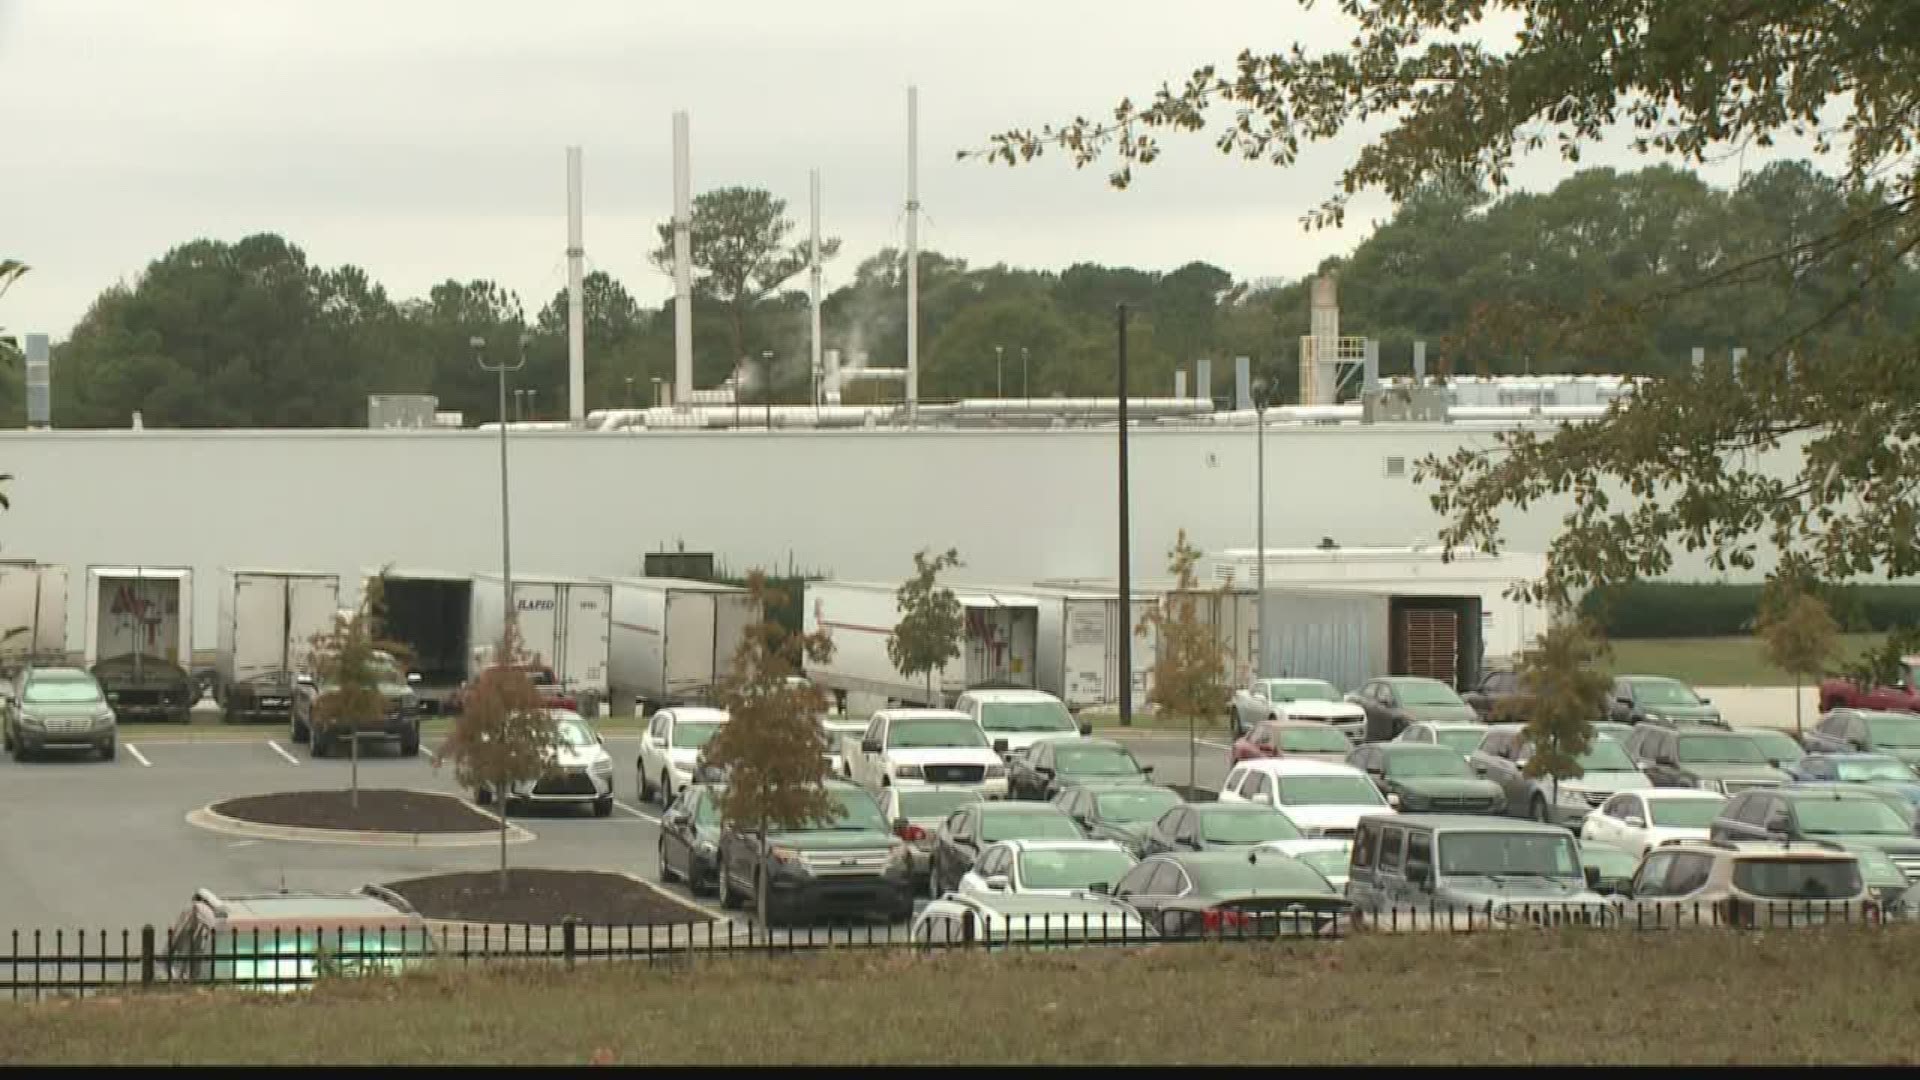 The BD plant in Covington reopened Thusrday morning, using ethylene oxide to sterilize medical equipment.  The plant had closed for a week after a legal confrontatio